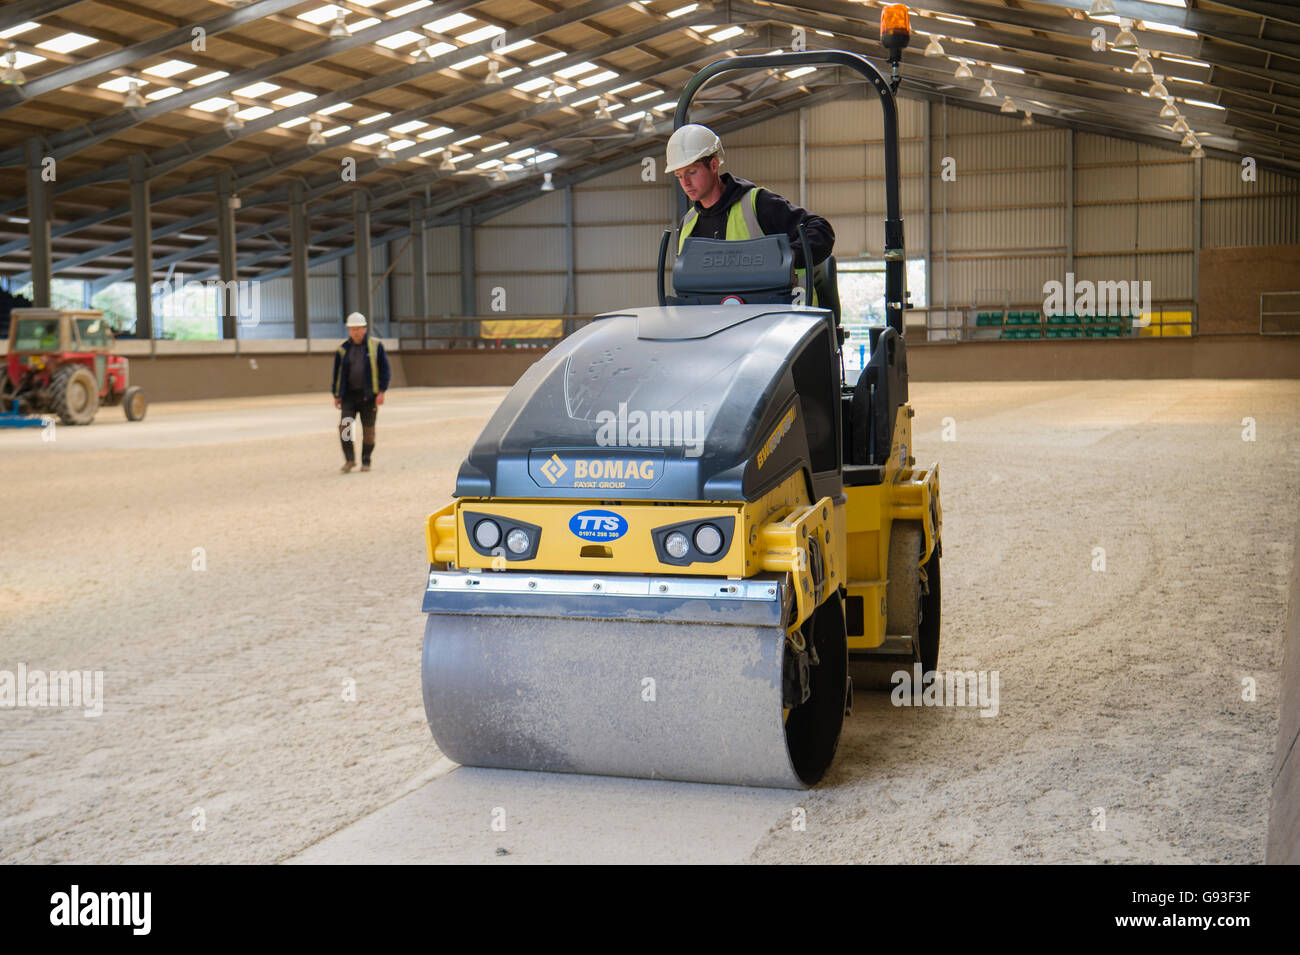 Heavy plant contract hire: A man operating a motorised mechanical roller machine preparing the new surface of an indoor equine riding centre, at Aberystwyth University, Wales UK Stock Photo